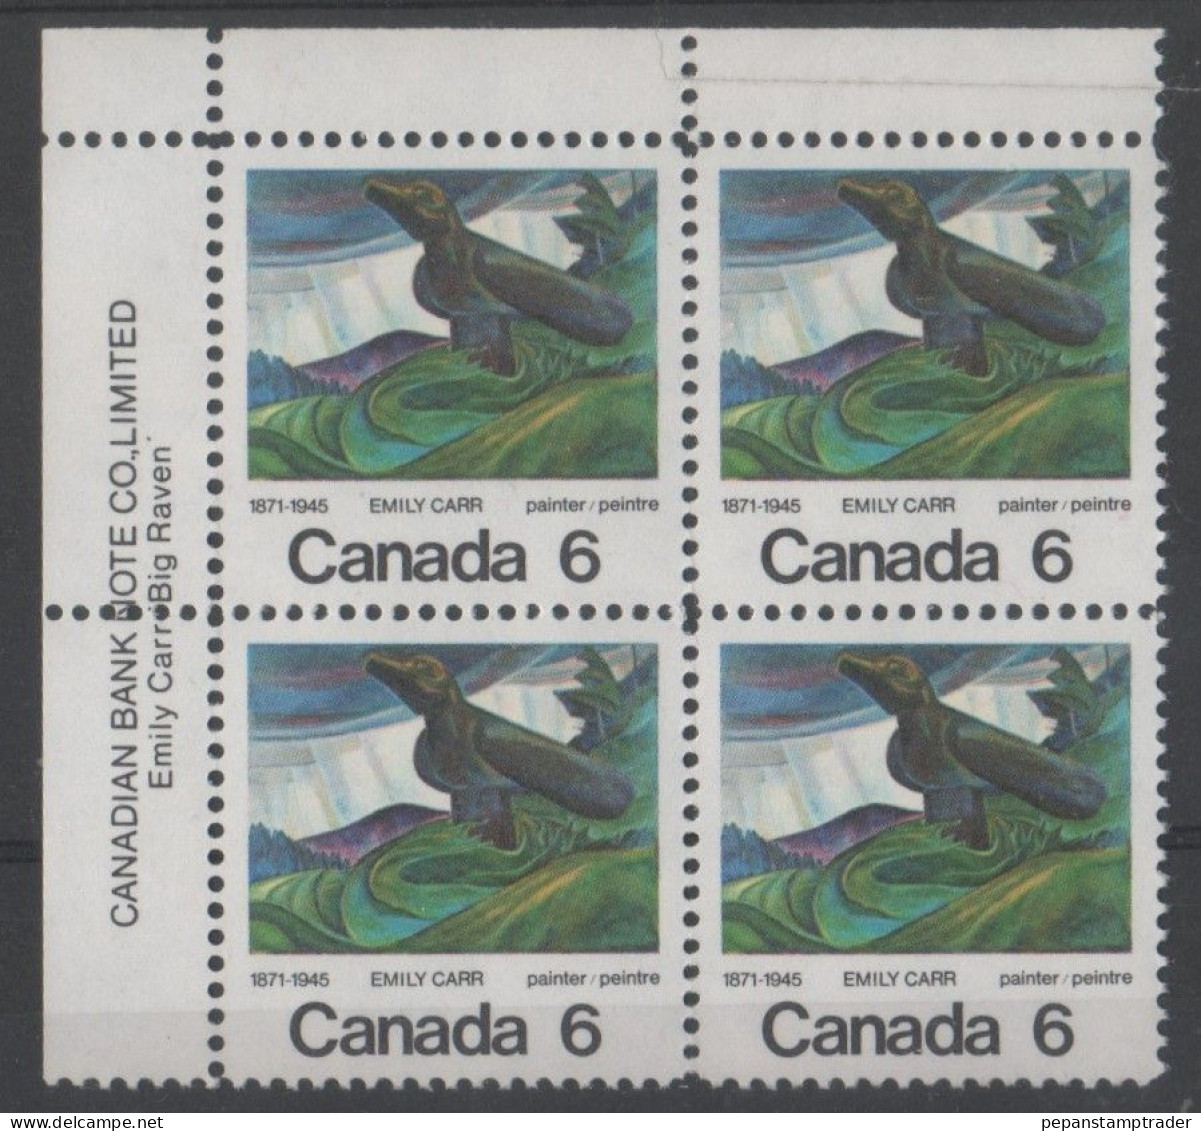 Canada - #532 - MNH PB - Plate Number & Inscriptions